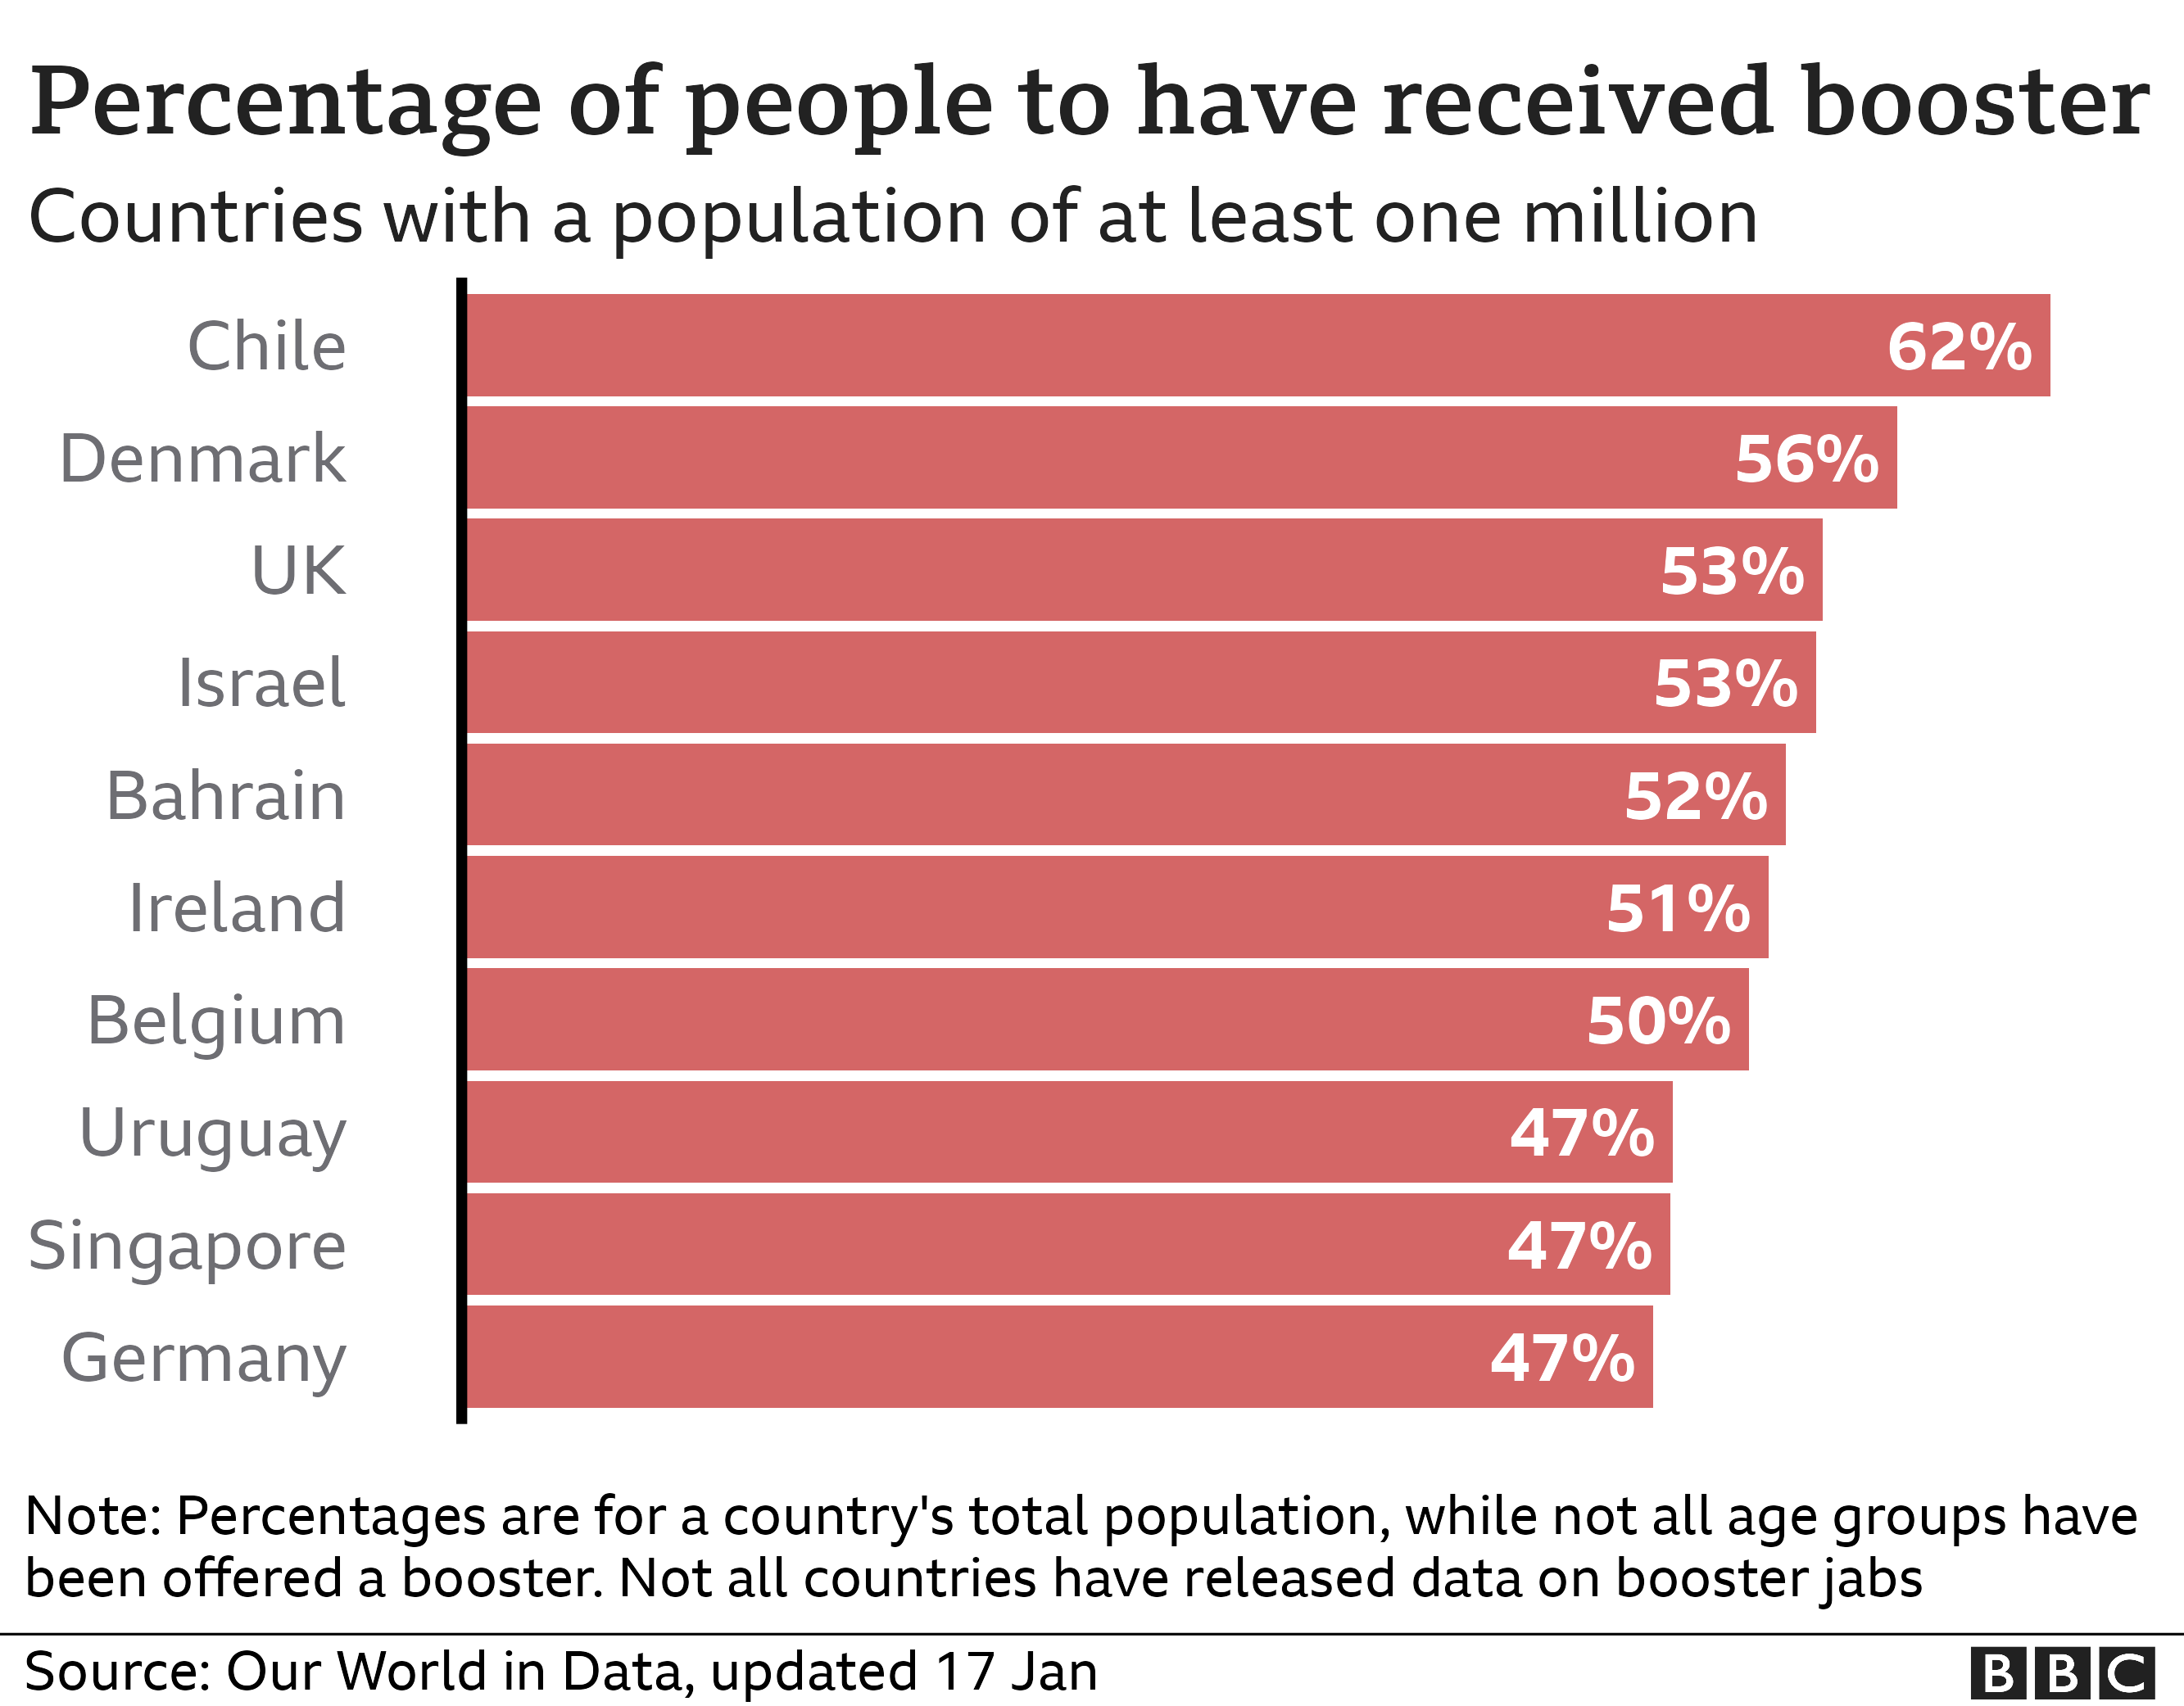 Chart showing percentage of people to have received boosters in countries with a population of at least one million